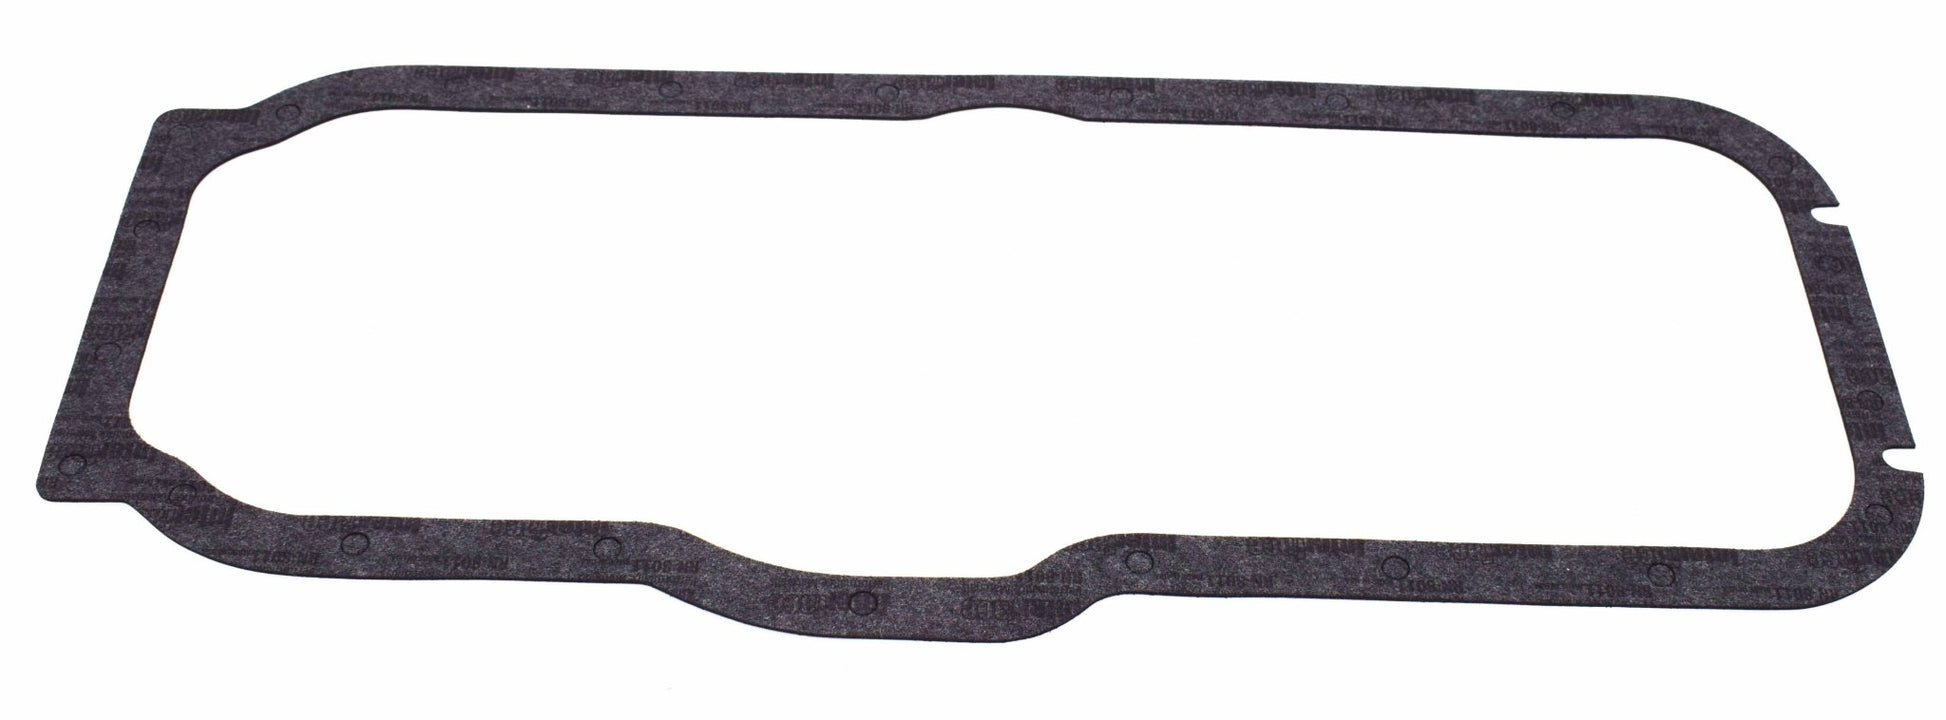 Oil Pan Gasket, 1950-1955 Jeepster, Station Wagon with 6-161 Engine - The JeepsterMan